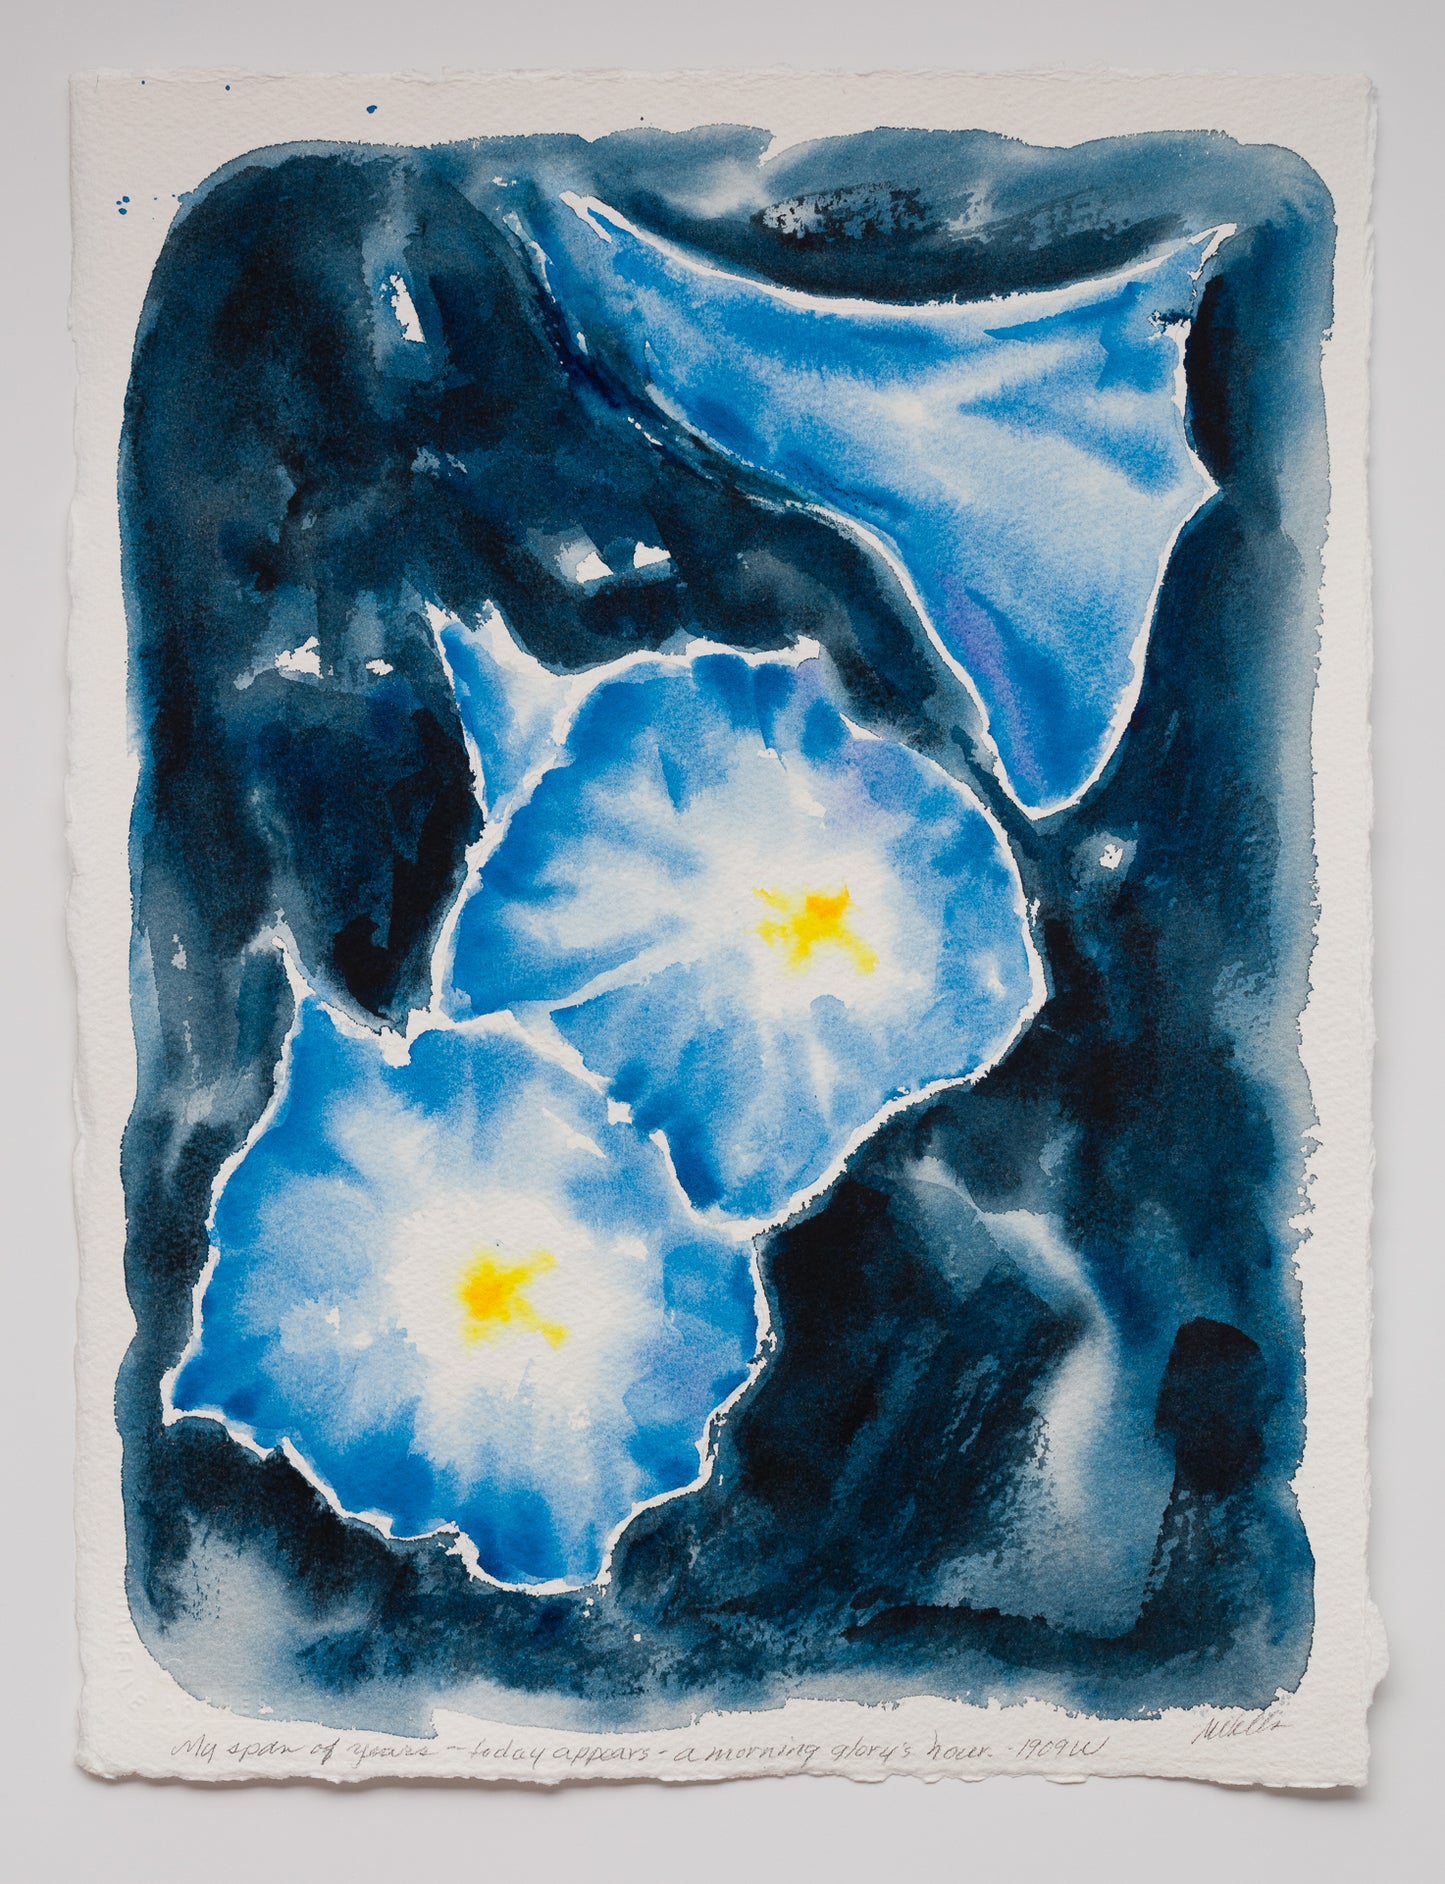 Watercolor “A Morning Glory's Hour” by Marilyn Wells - Original